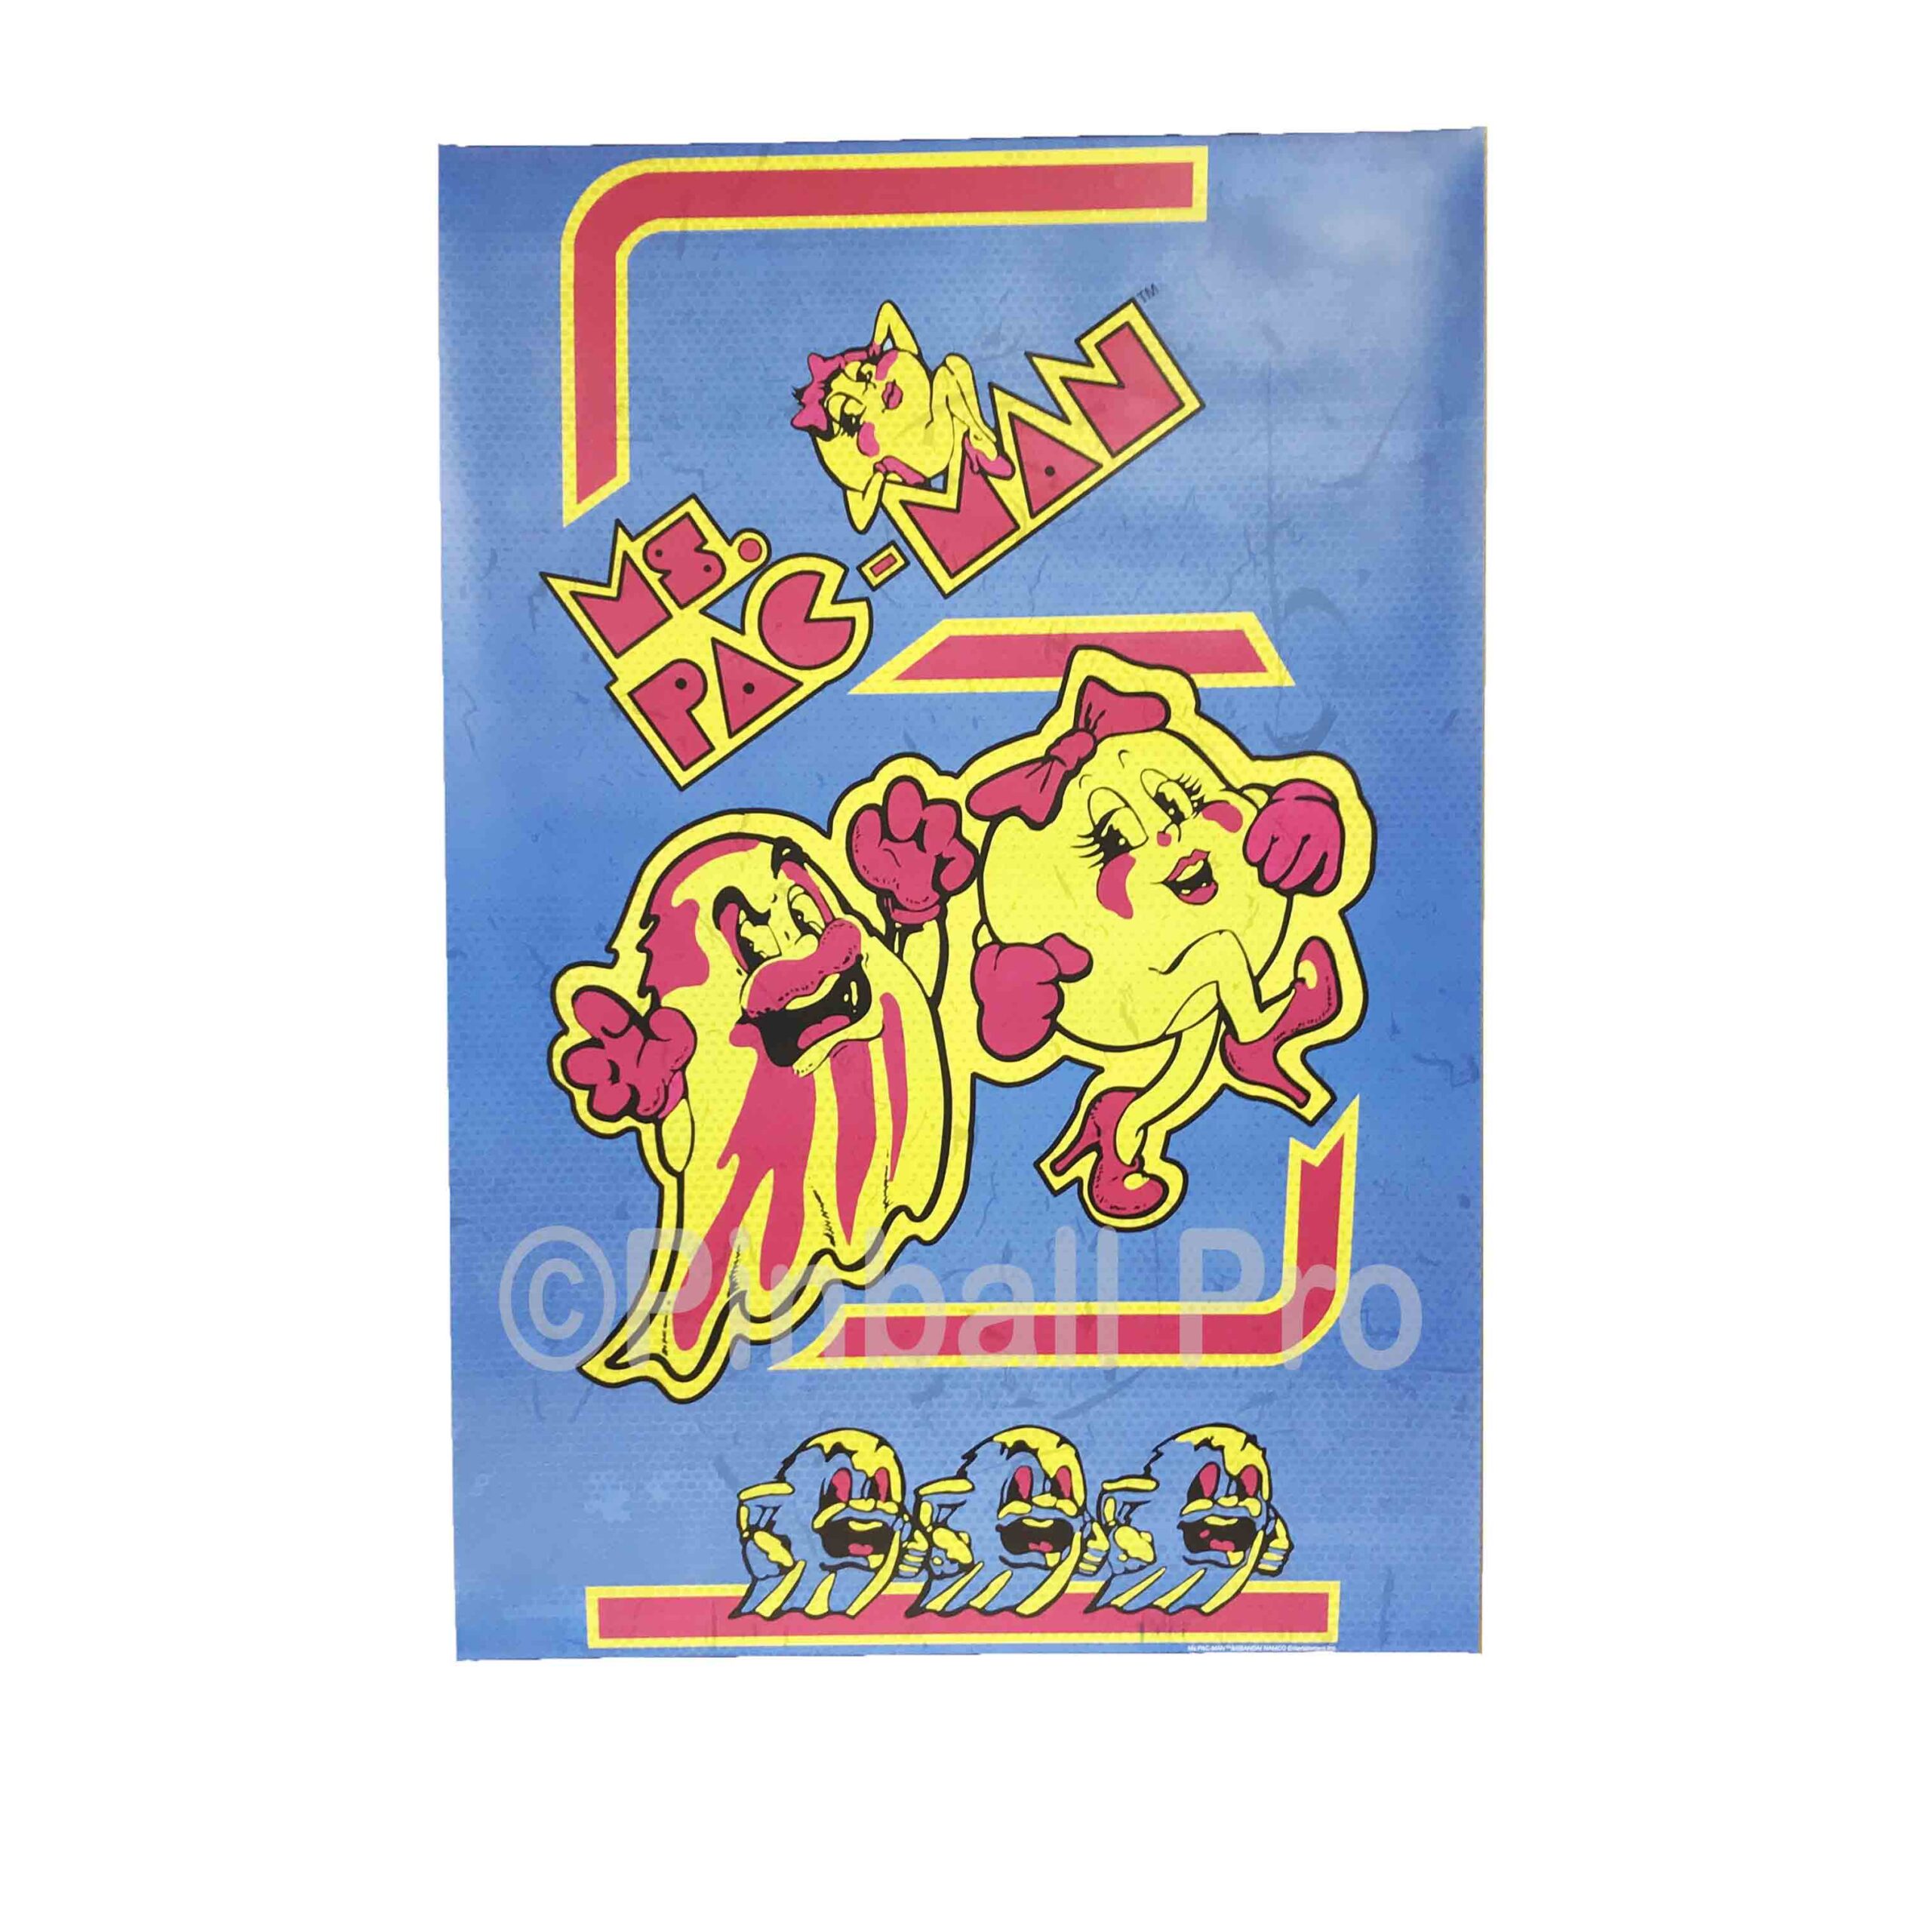 Cool retro poster !! Ms Pacman wall art 